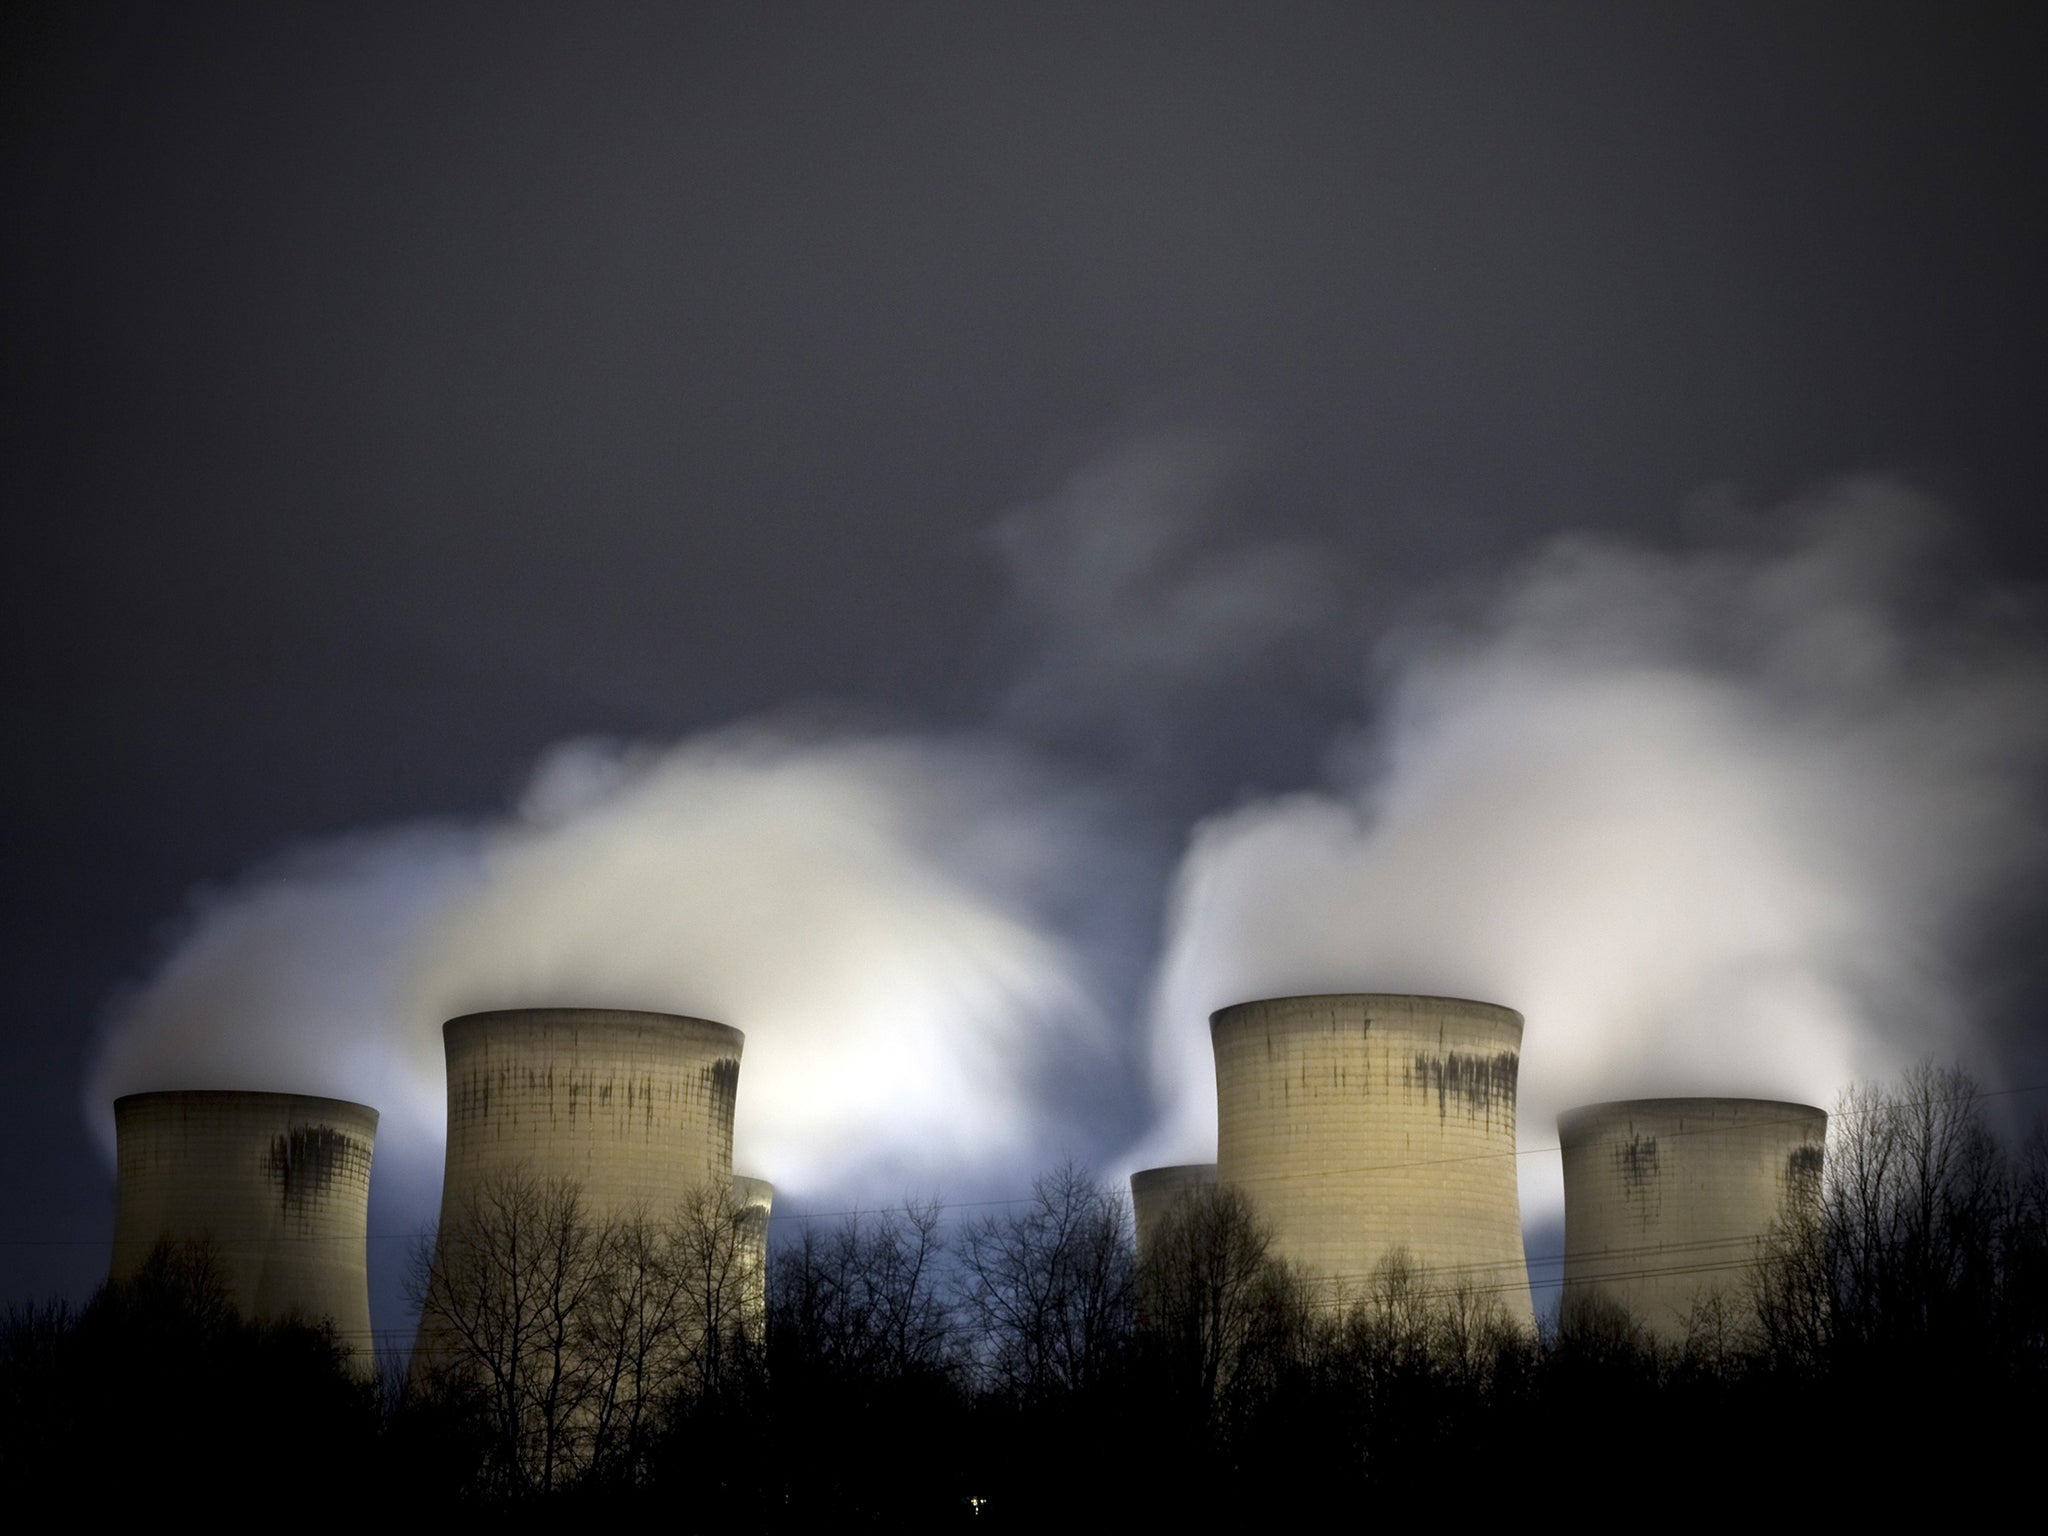 Drax may decide to mothball its coal-fired power units as part of a review